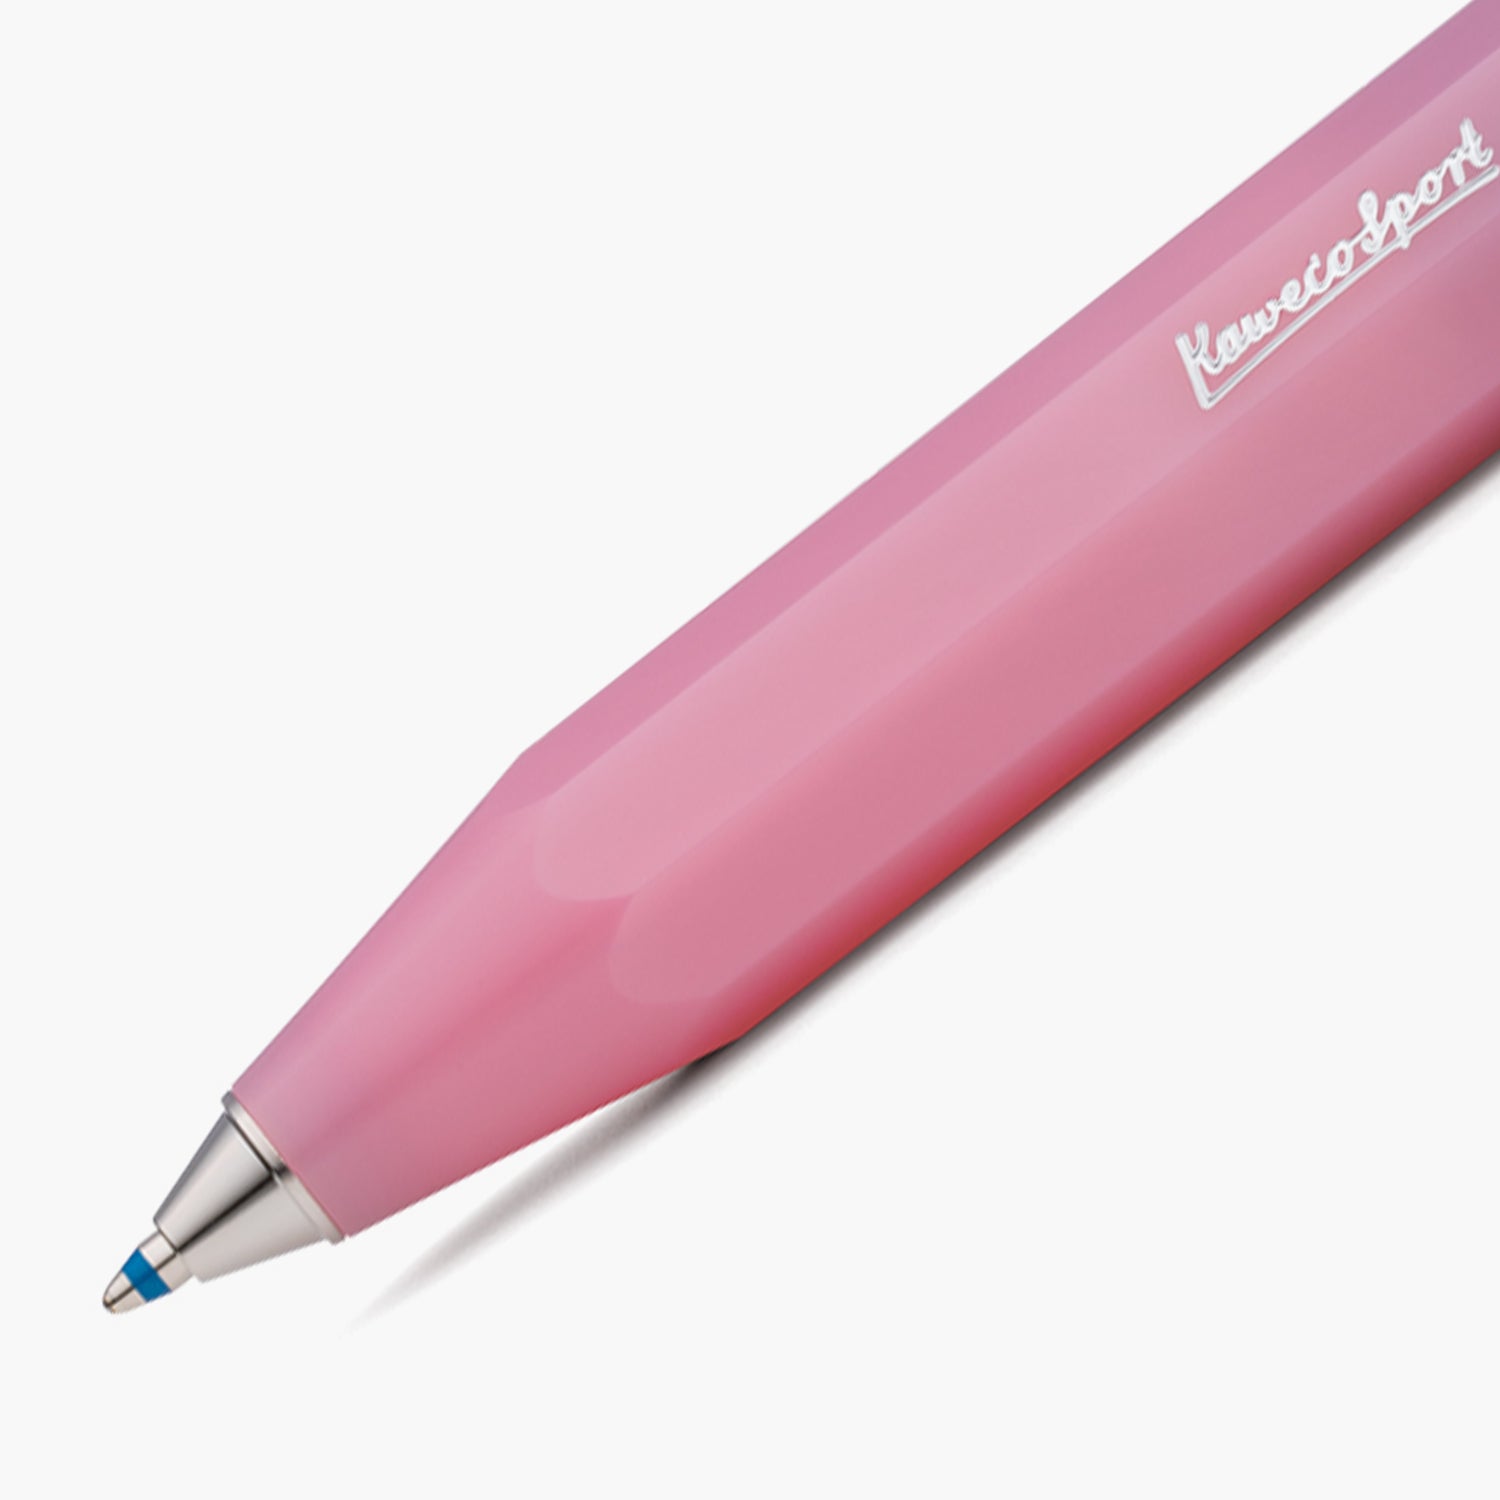 Frosted Sport Ballpoint Pen - Blush Pink